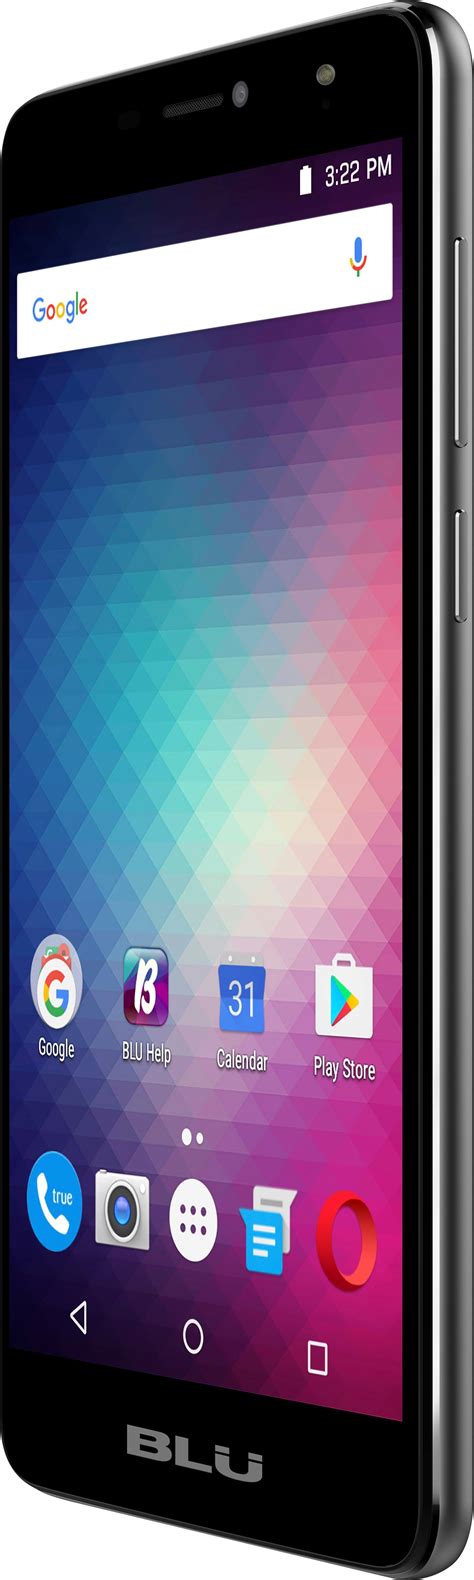 Customer Reviews Blu Studio Xl2 4g Lte With 16gb Memory Cell Phone